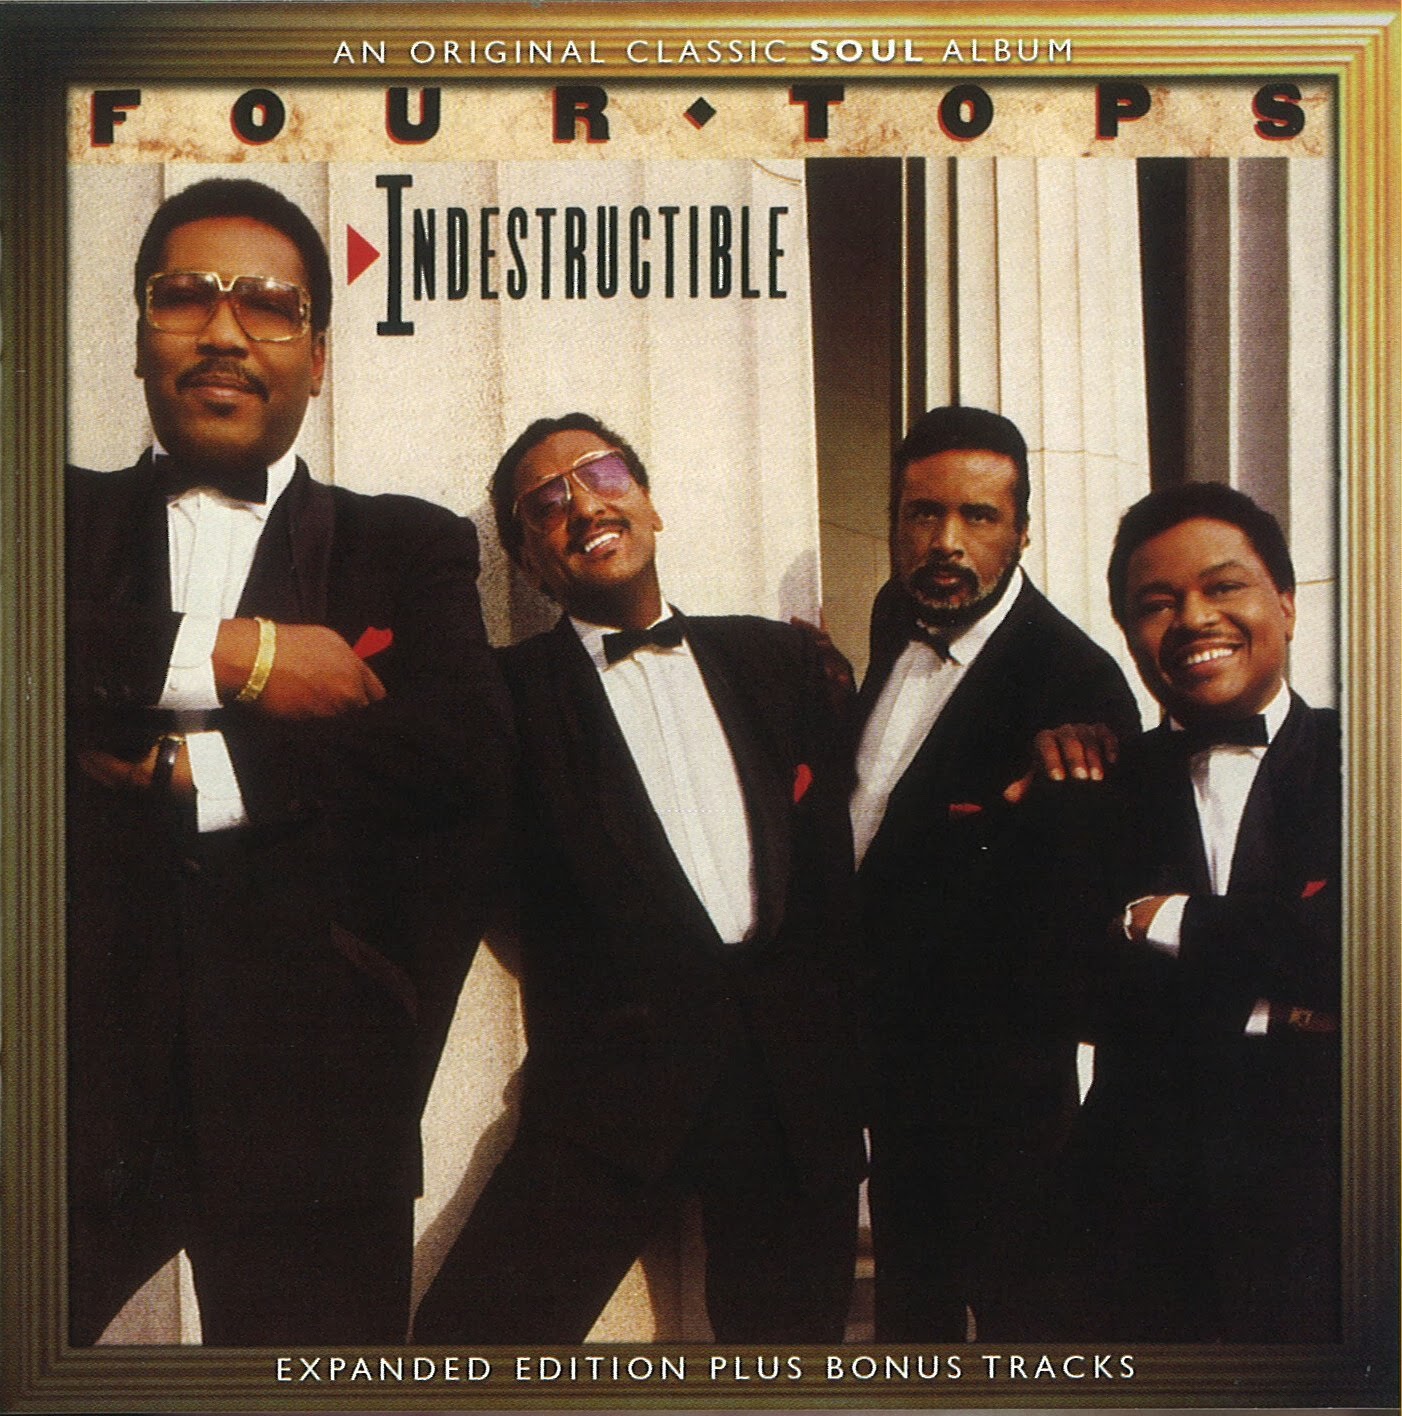 BENTLEYFUNK: The Four Tops 1988 Indestructible Expanded Edition 2013